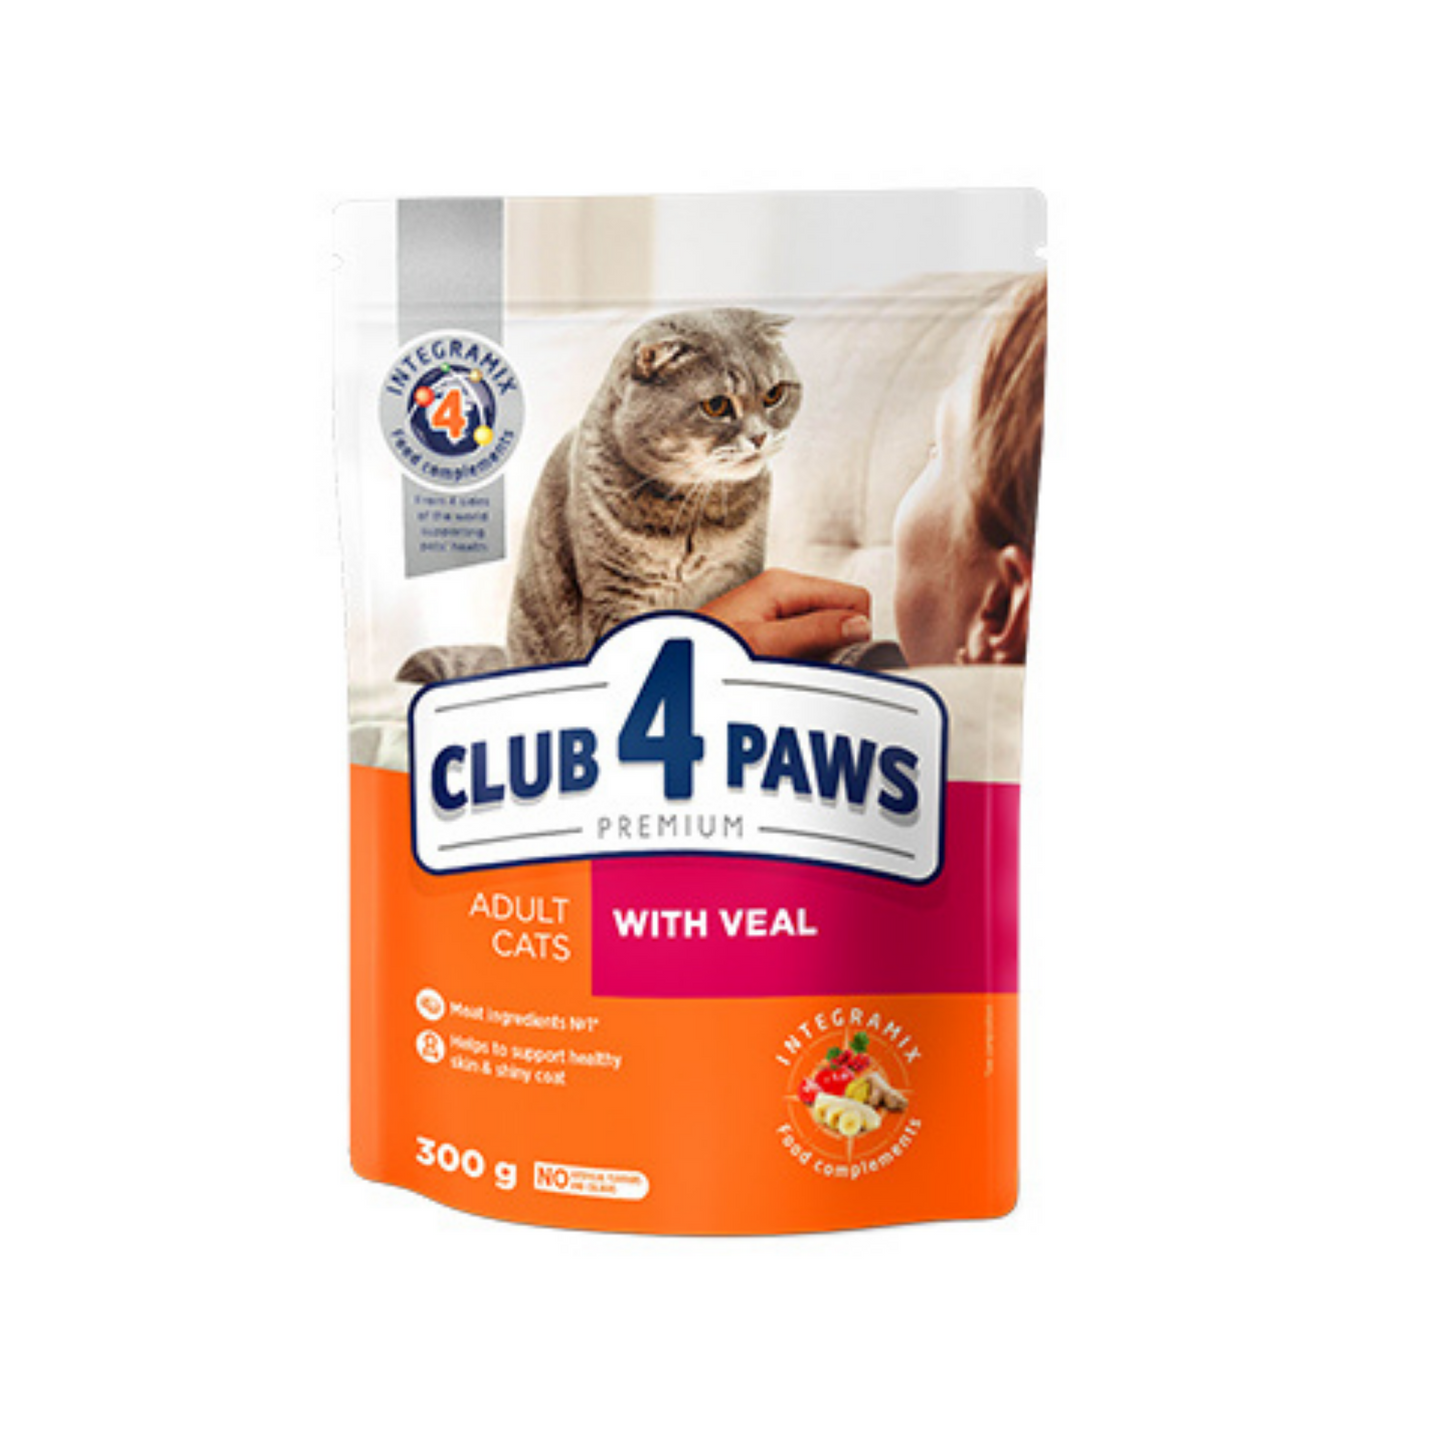 CLUB 4 PAWS Premium Cat Adult With Veal